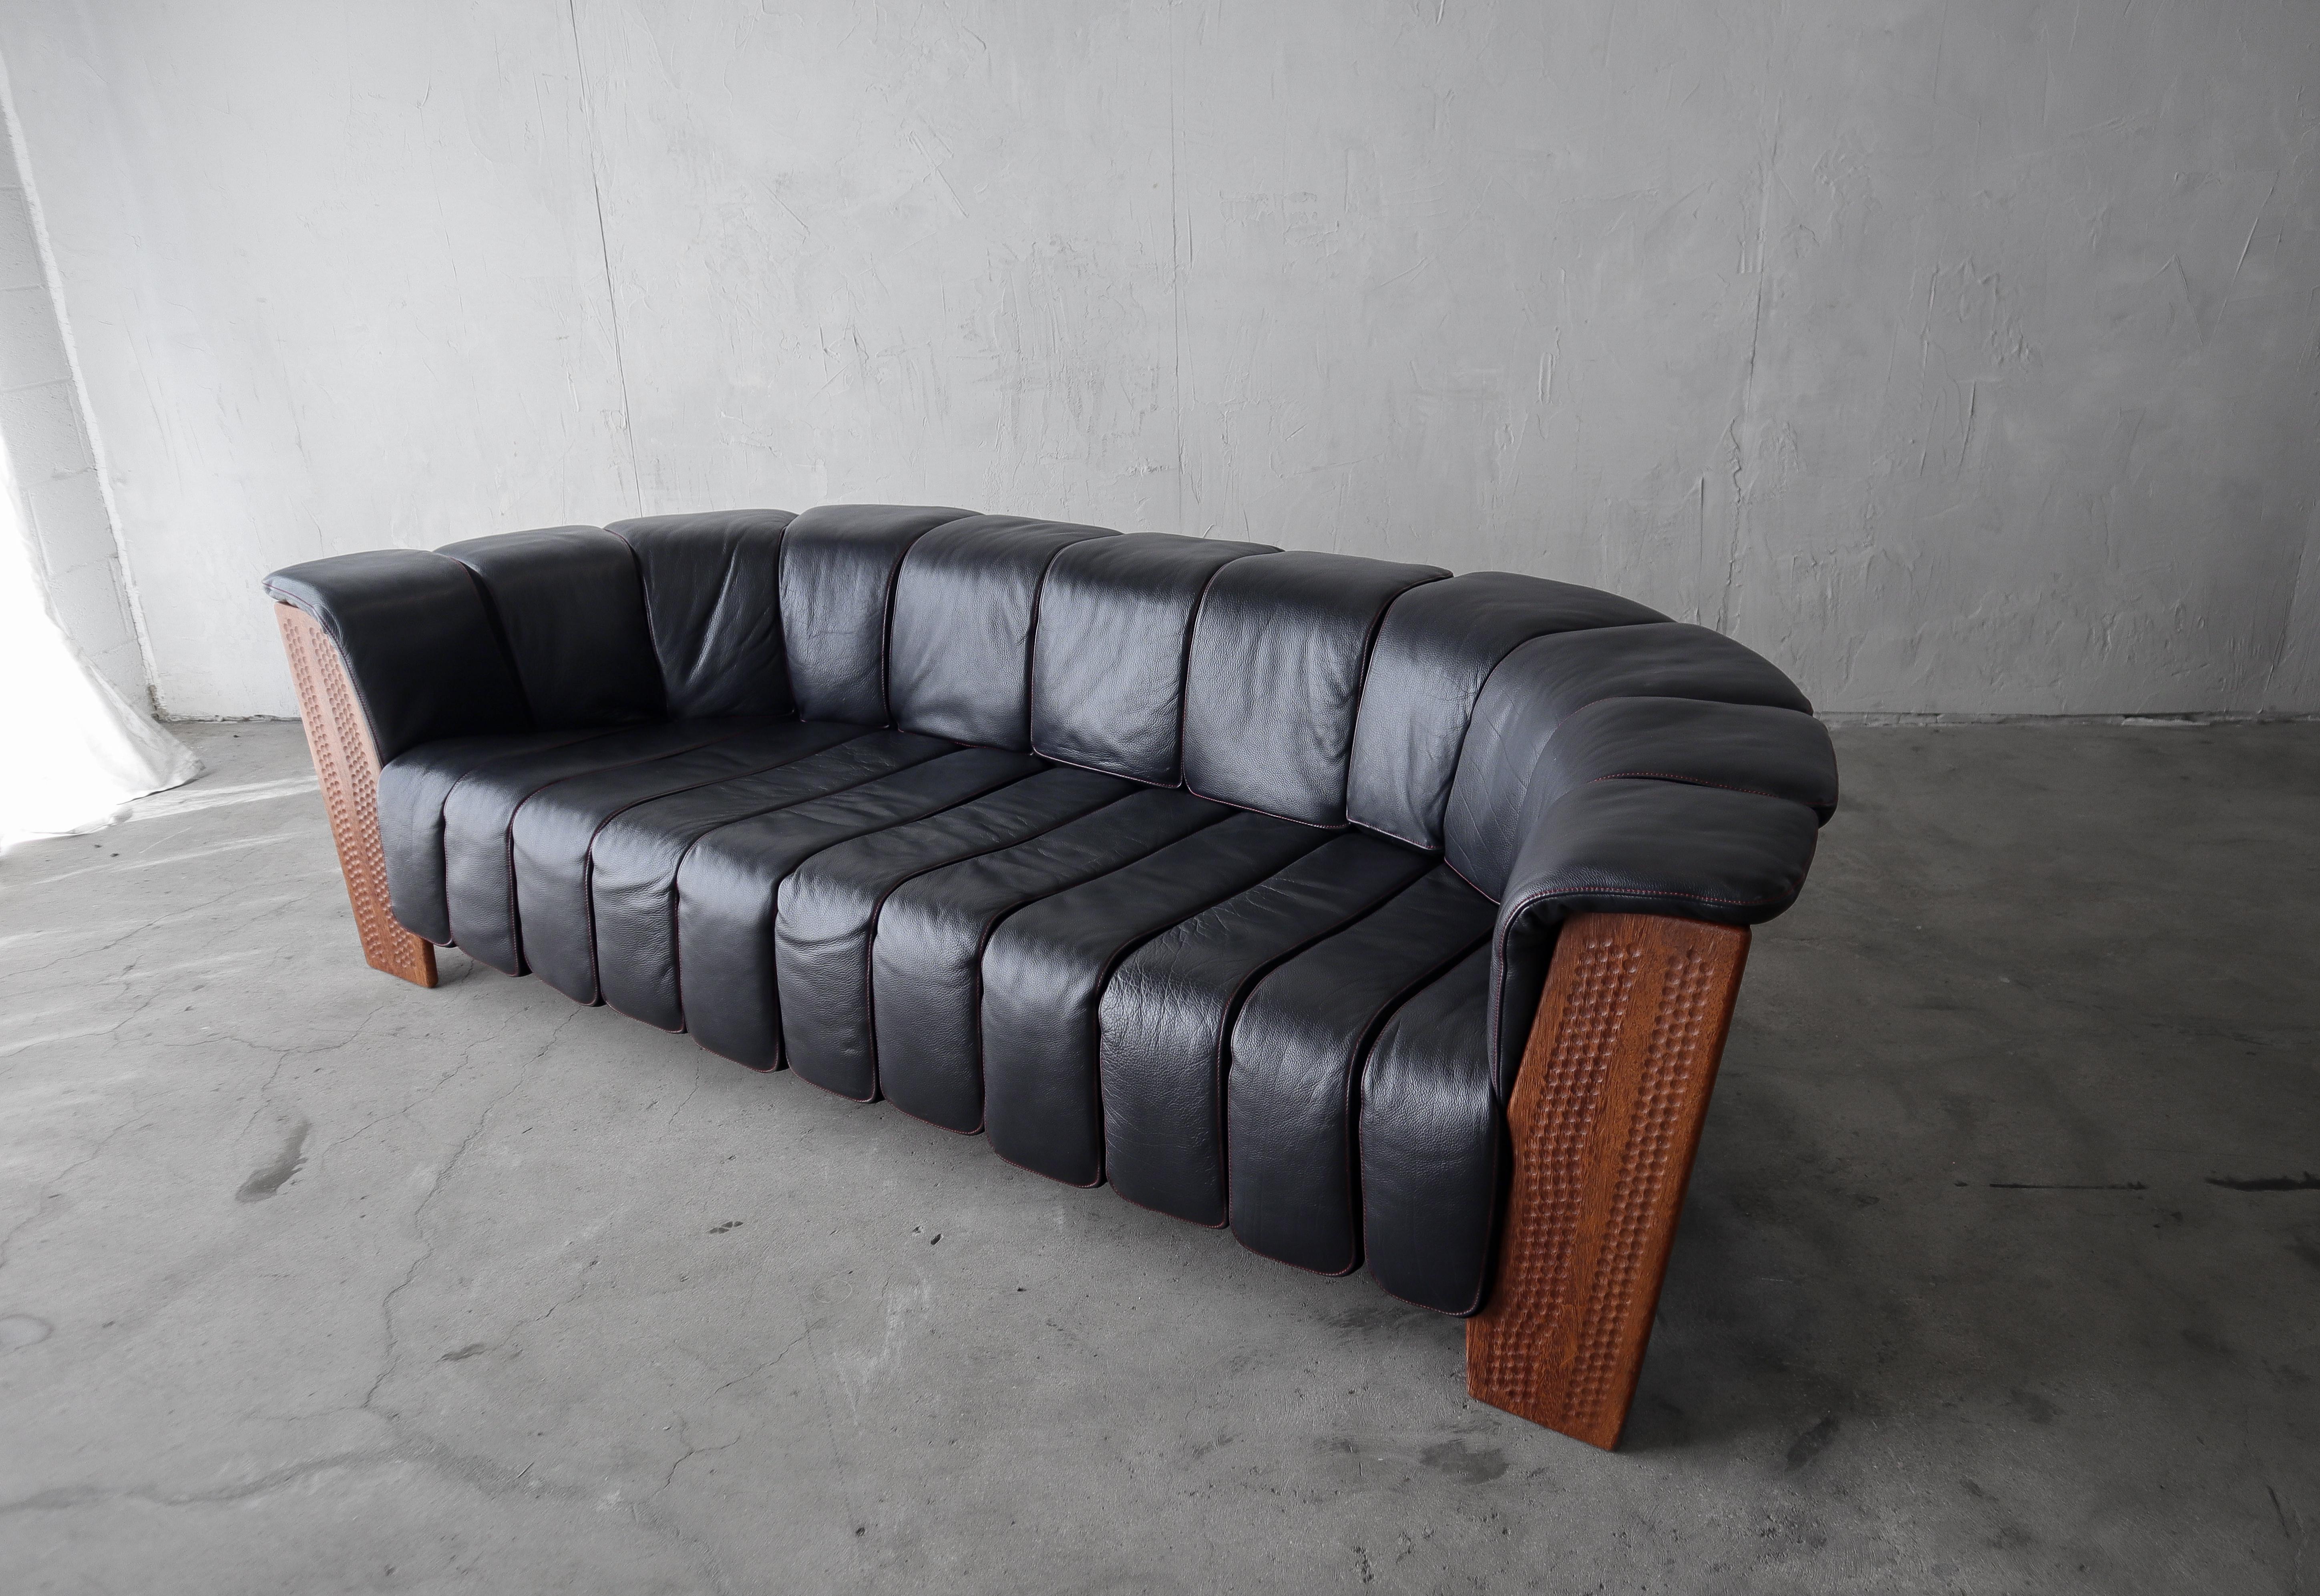 A beautiful leather and palmwood sofa from the Dreamtime Collection by Pacific Green Furniture. Constructed of black leather, suede and Palmwood. This offering is for the oversized chair.
The sofa is in superb condition, with no real imperfections